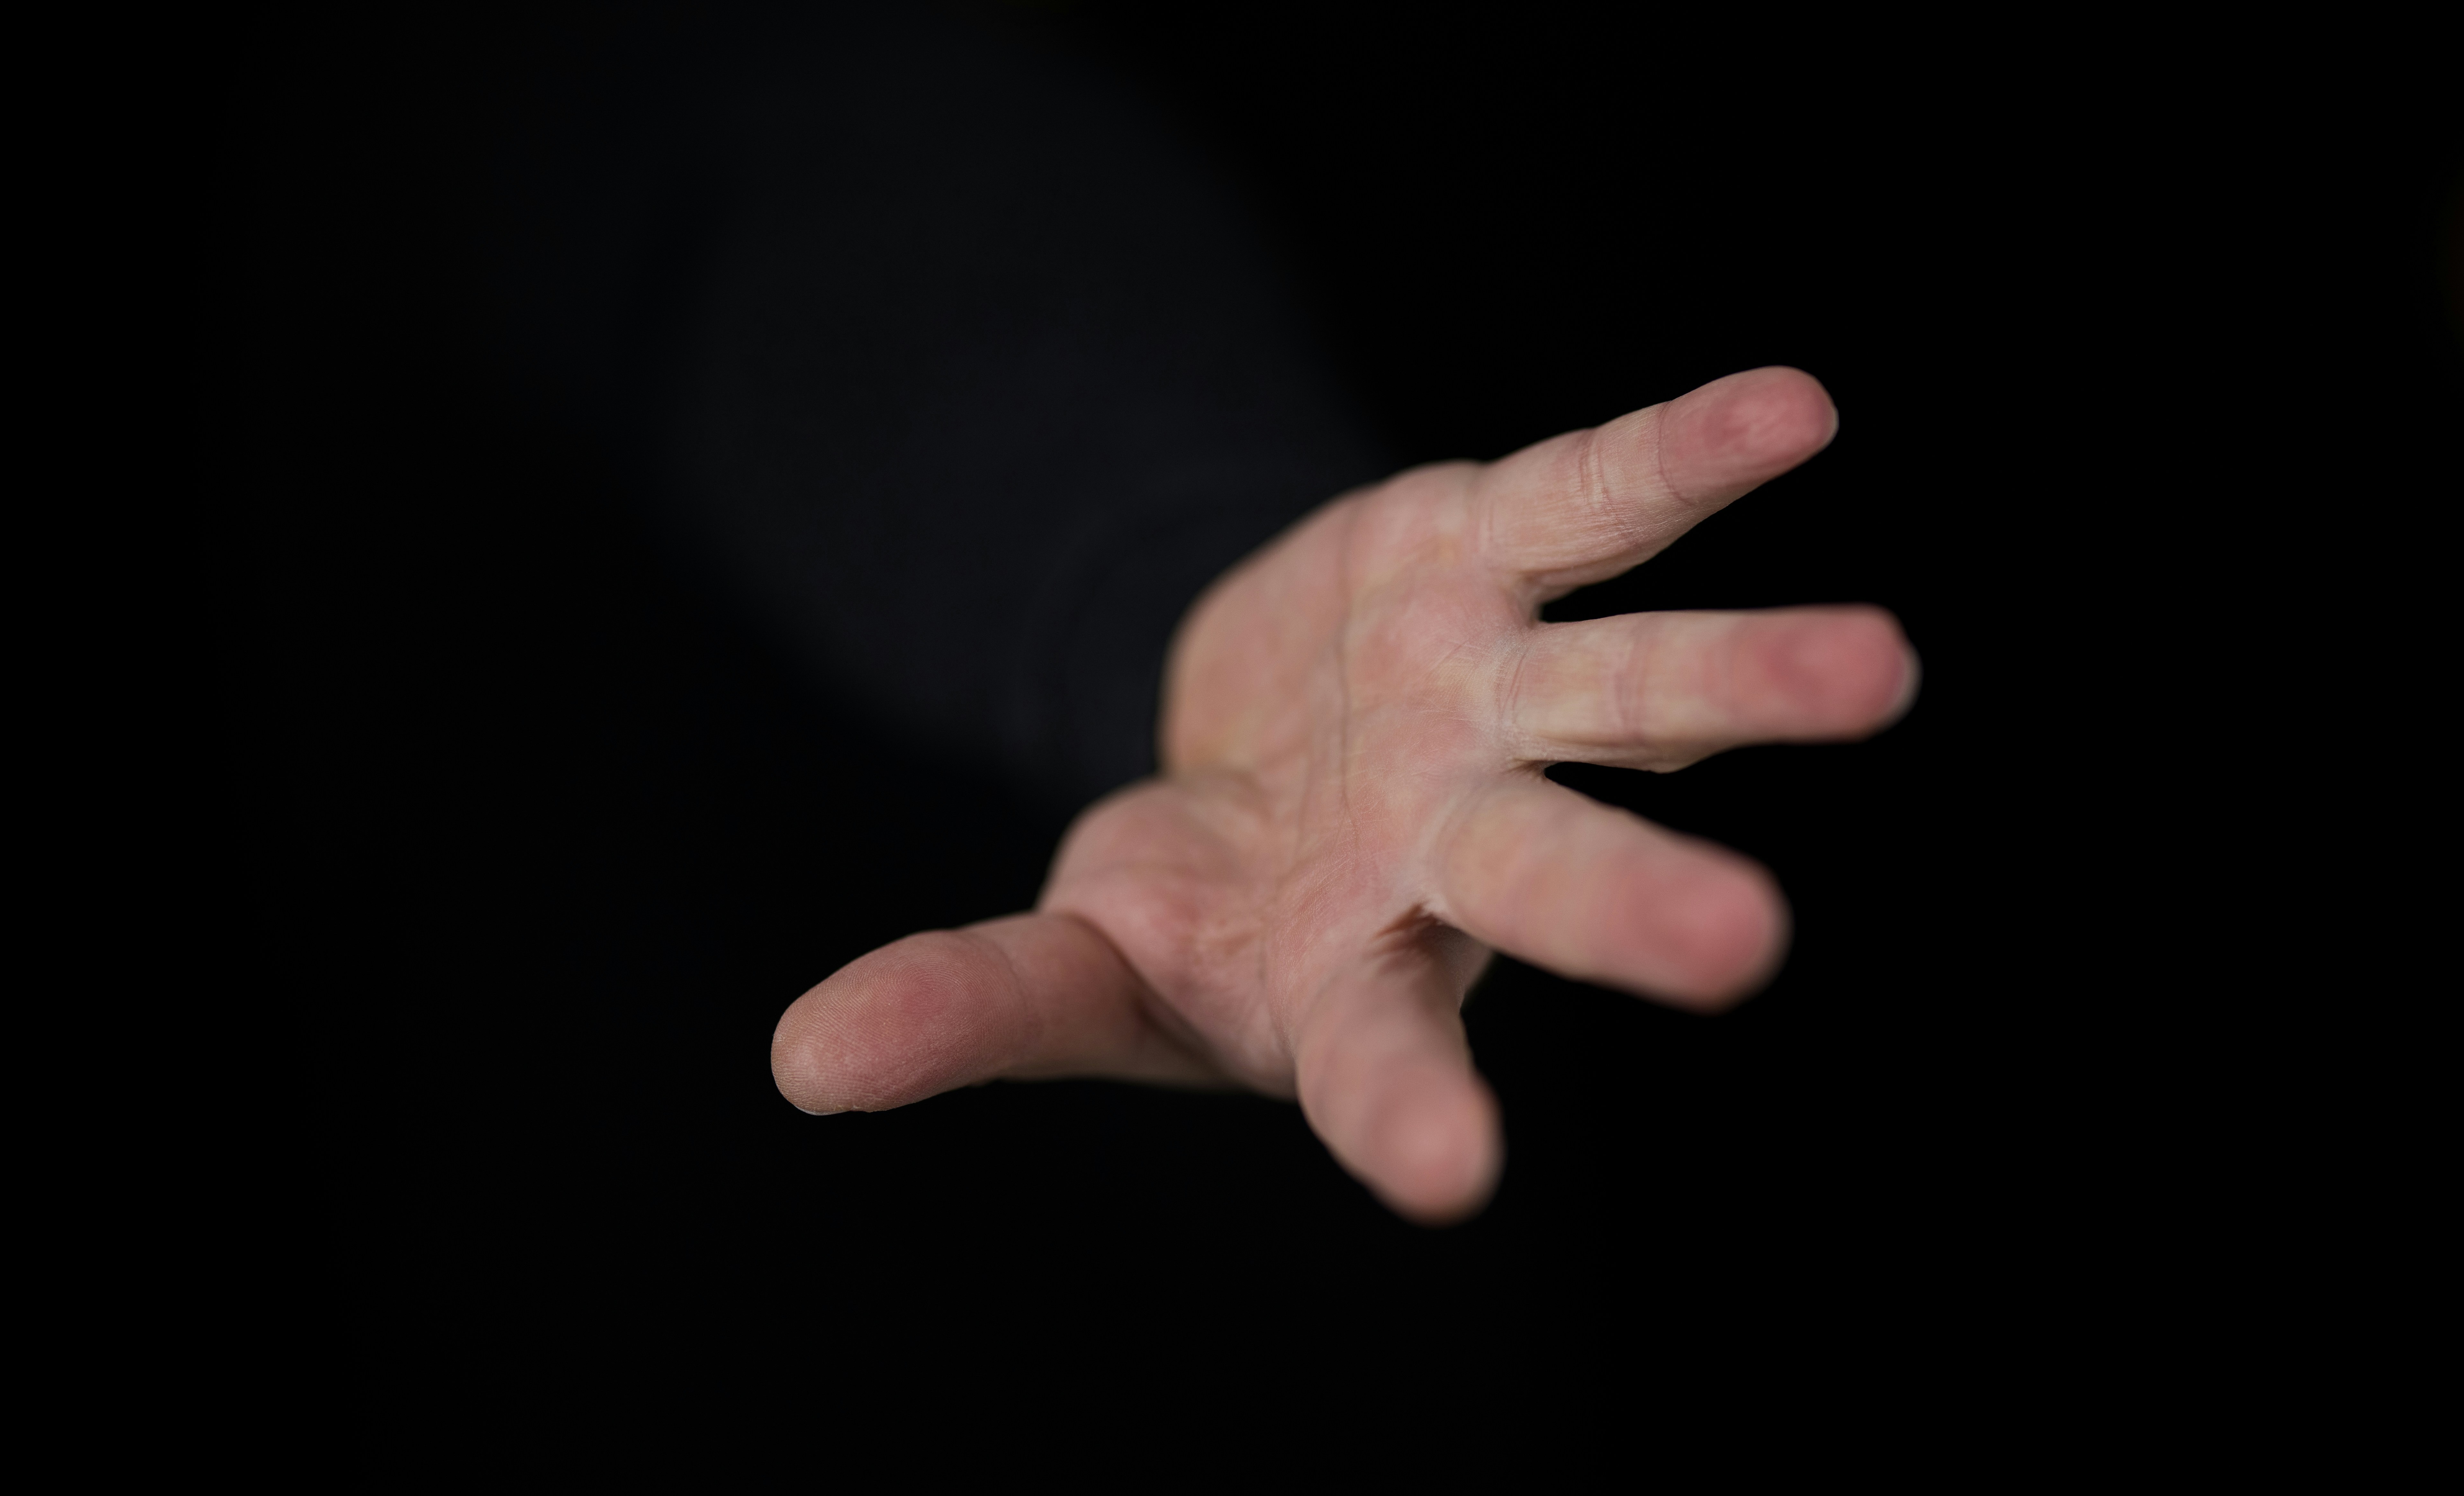 A hand reaching up from the depths of darkness